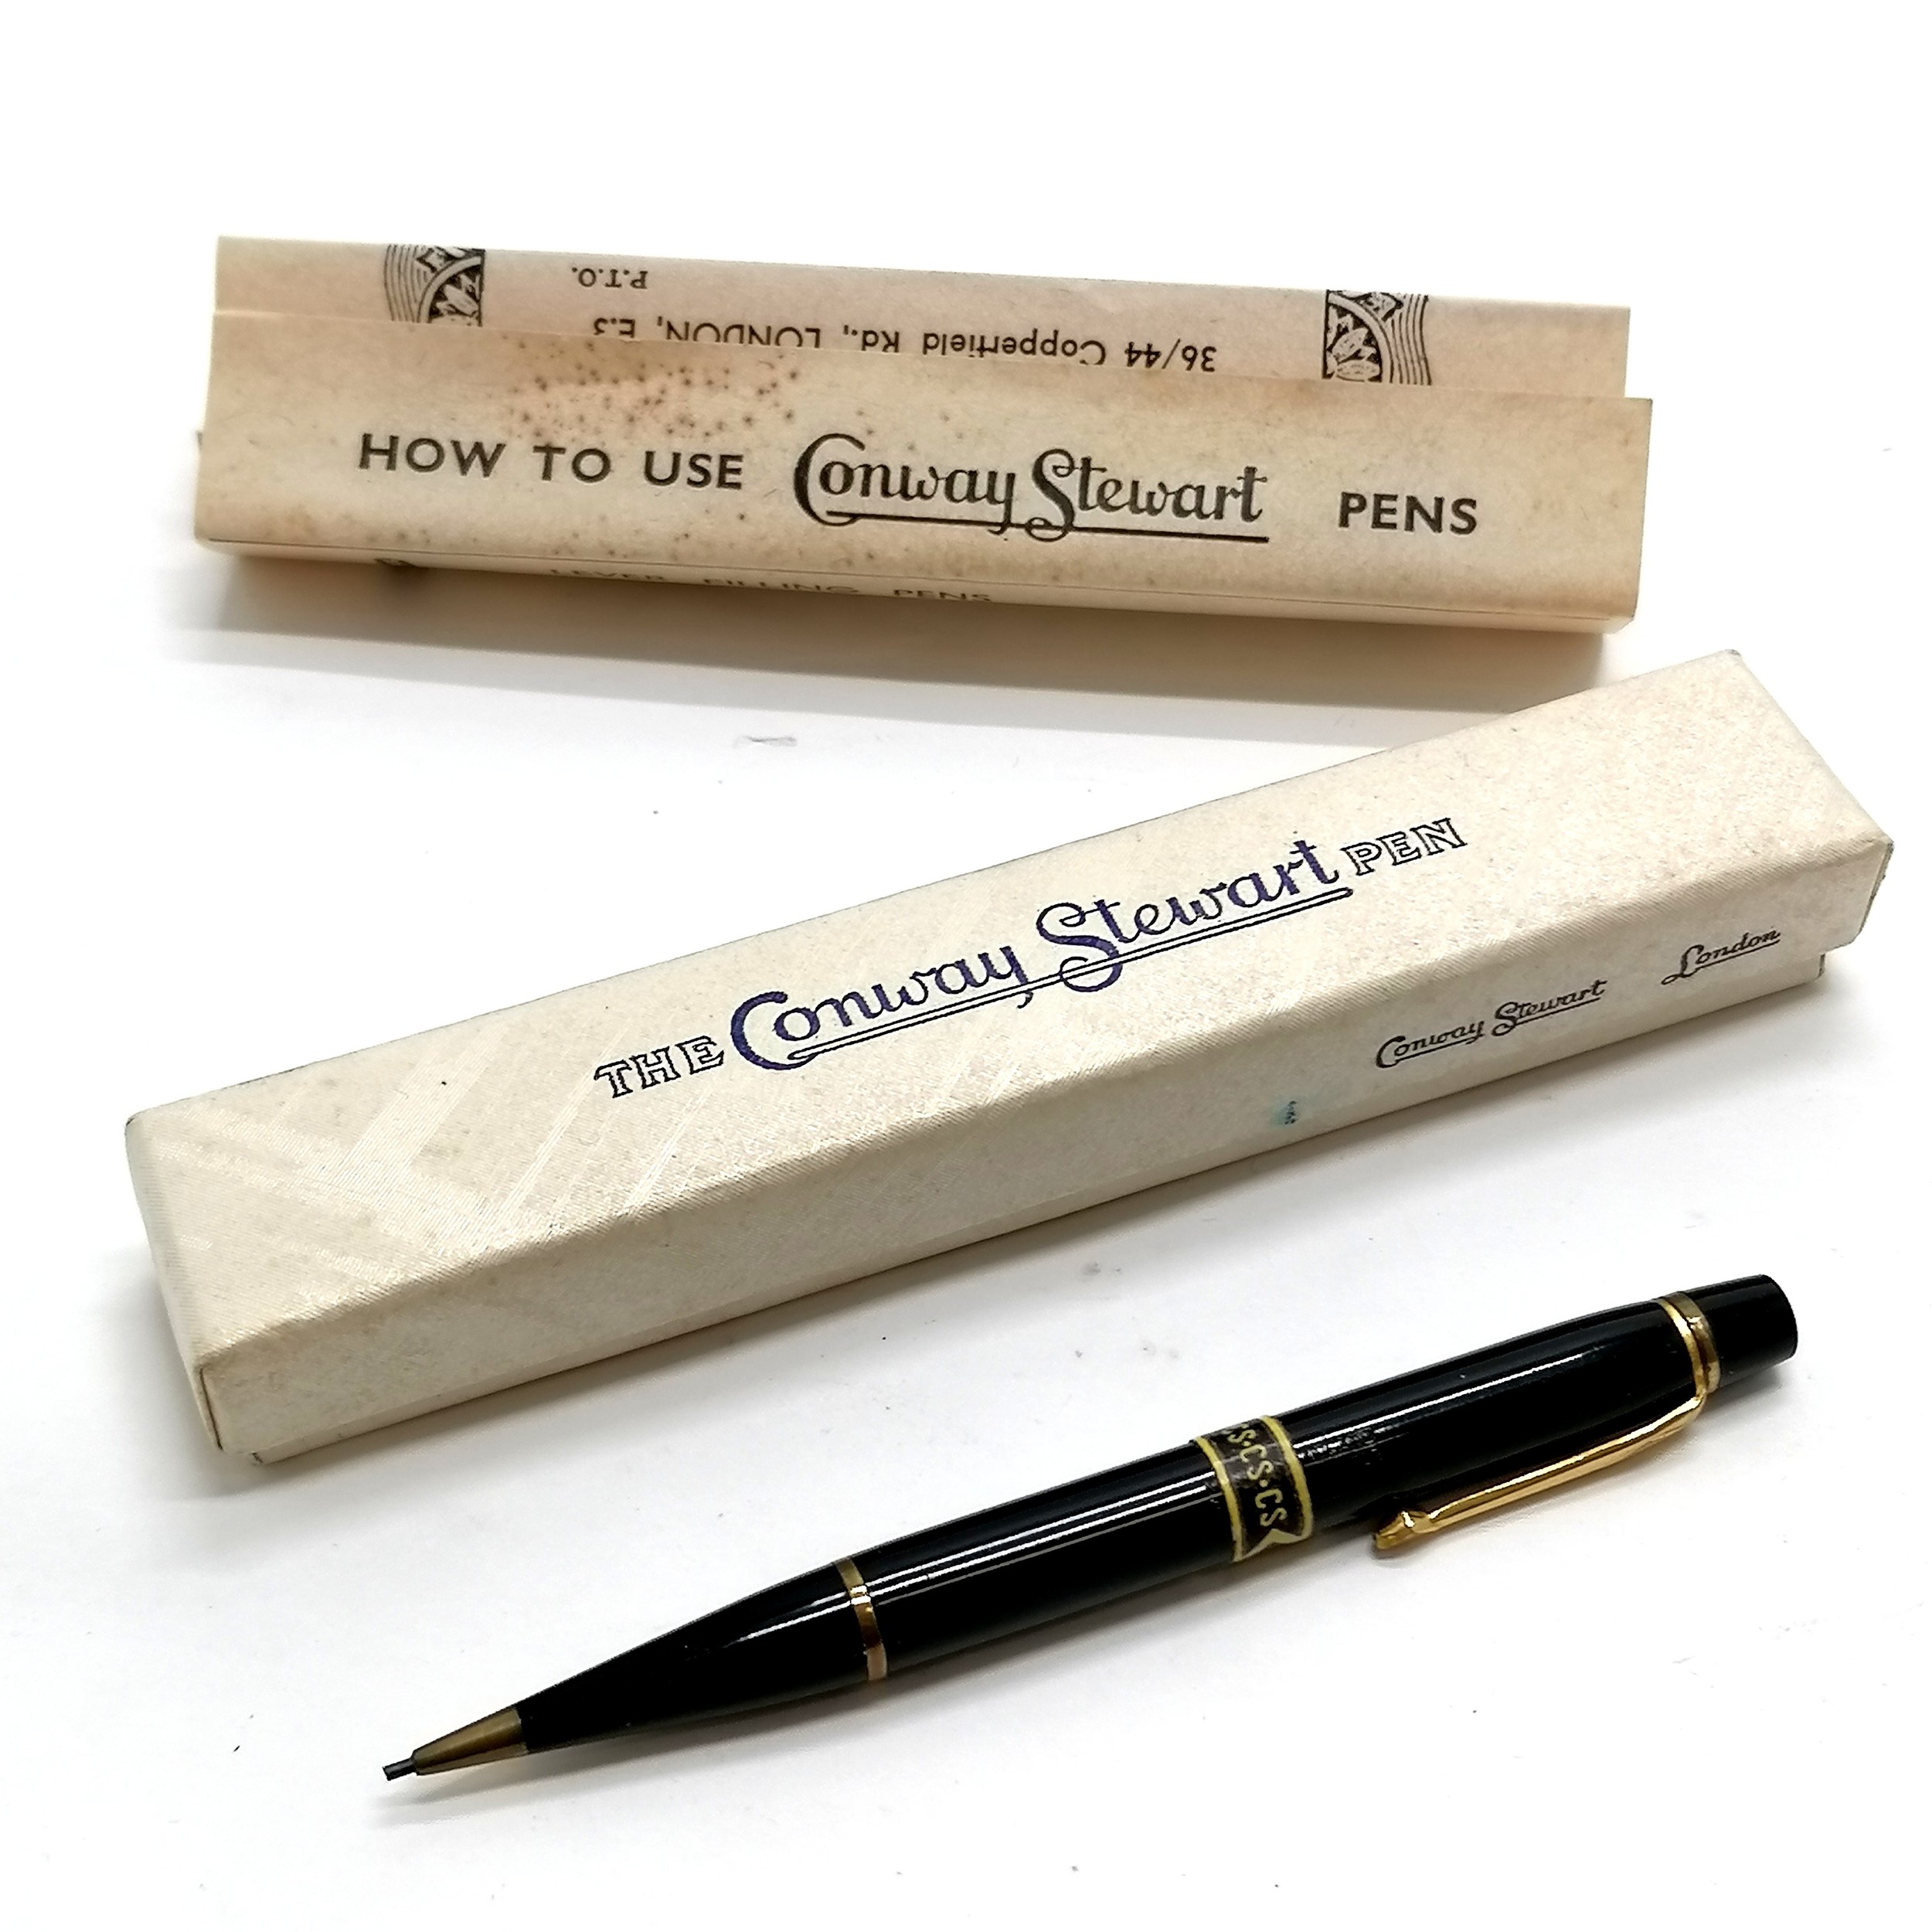 Conway Stewart propelling pencil in original box with leaflet and pencil in unused condition with